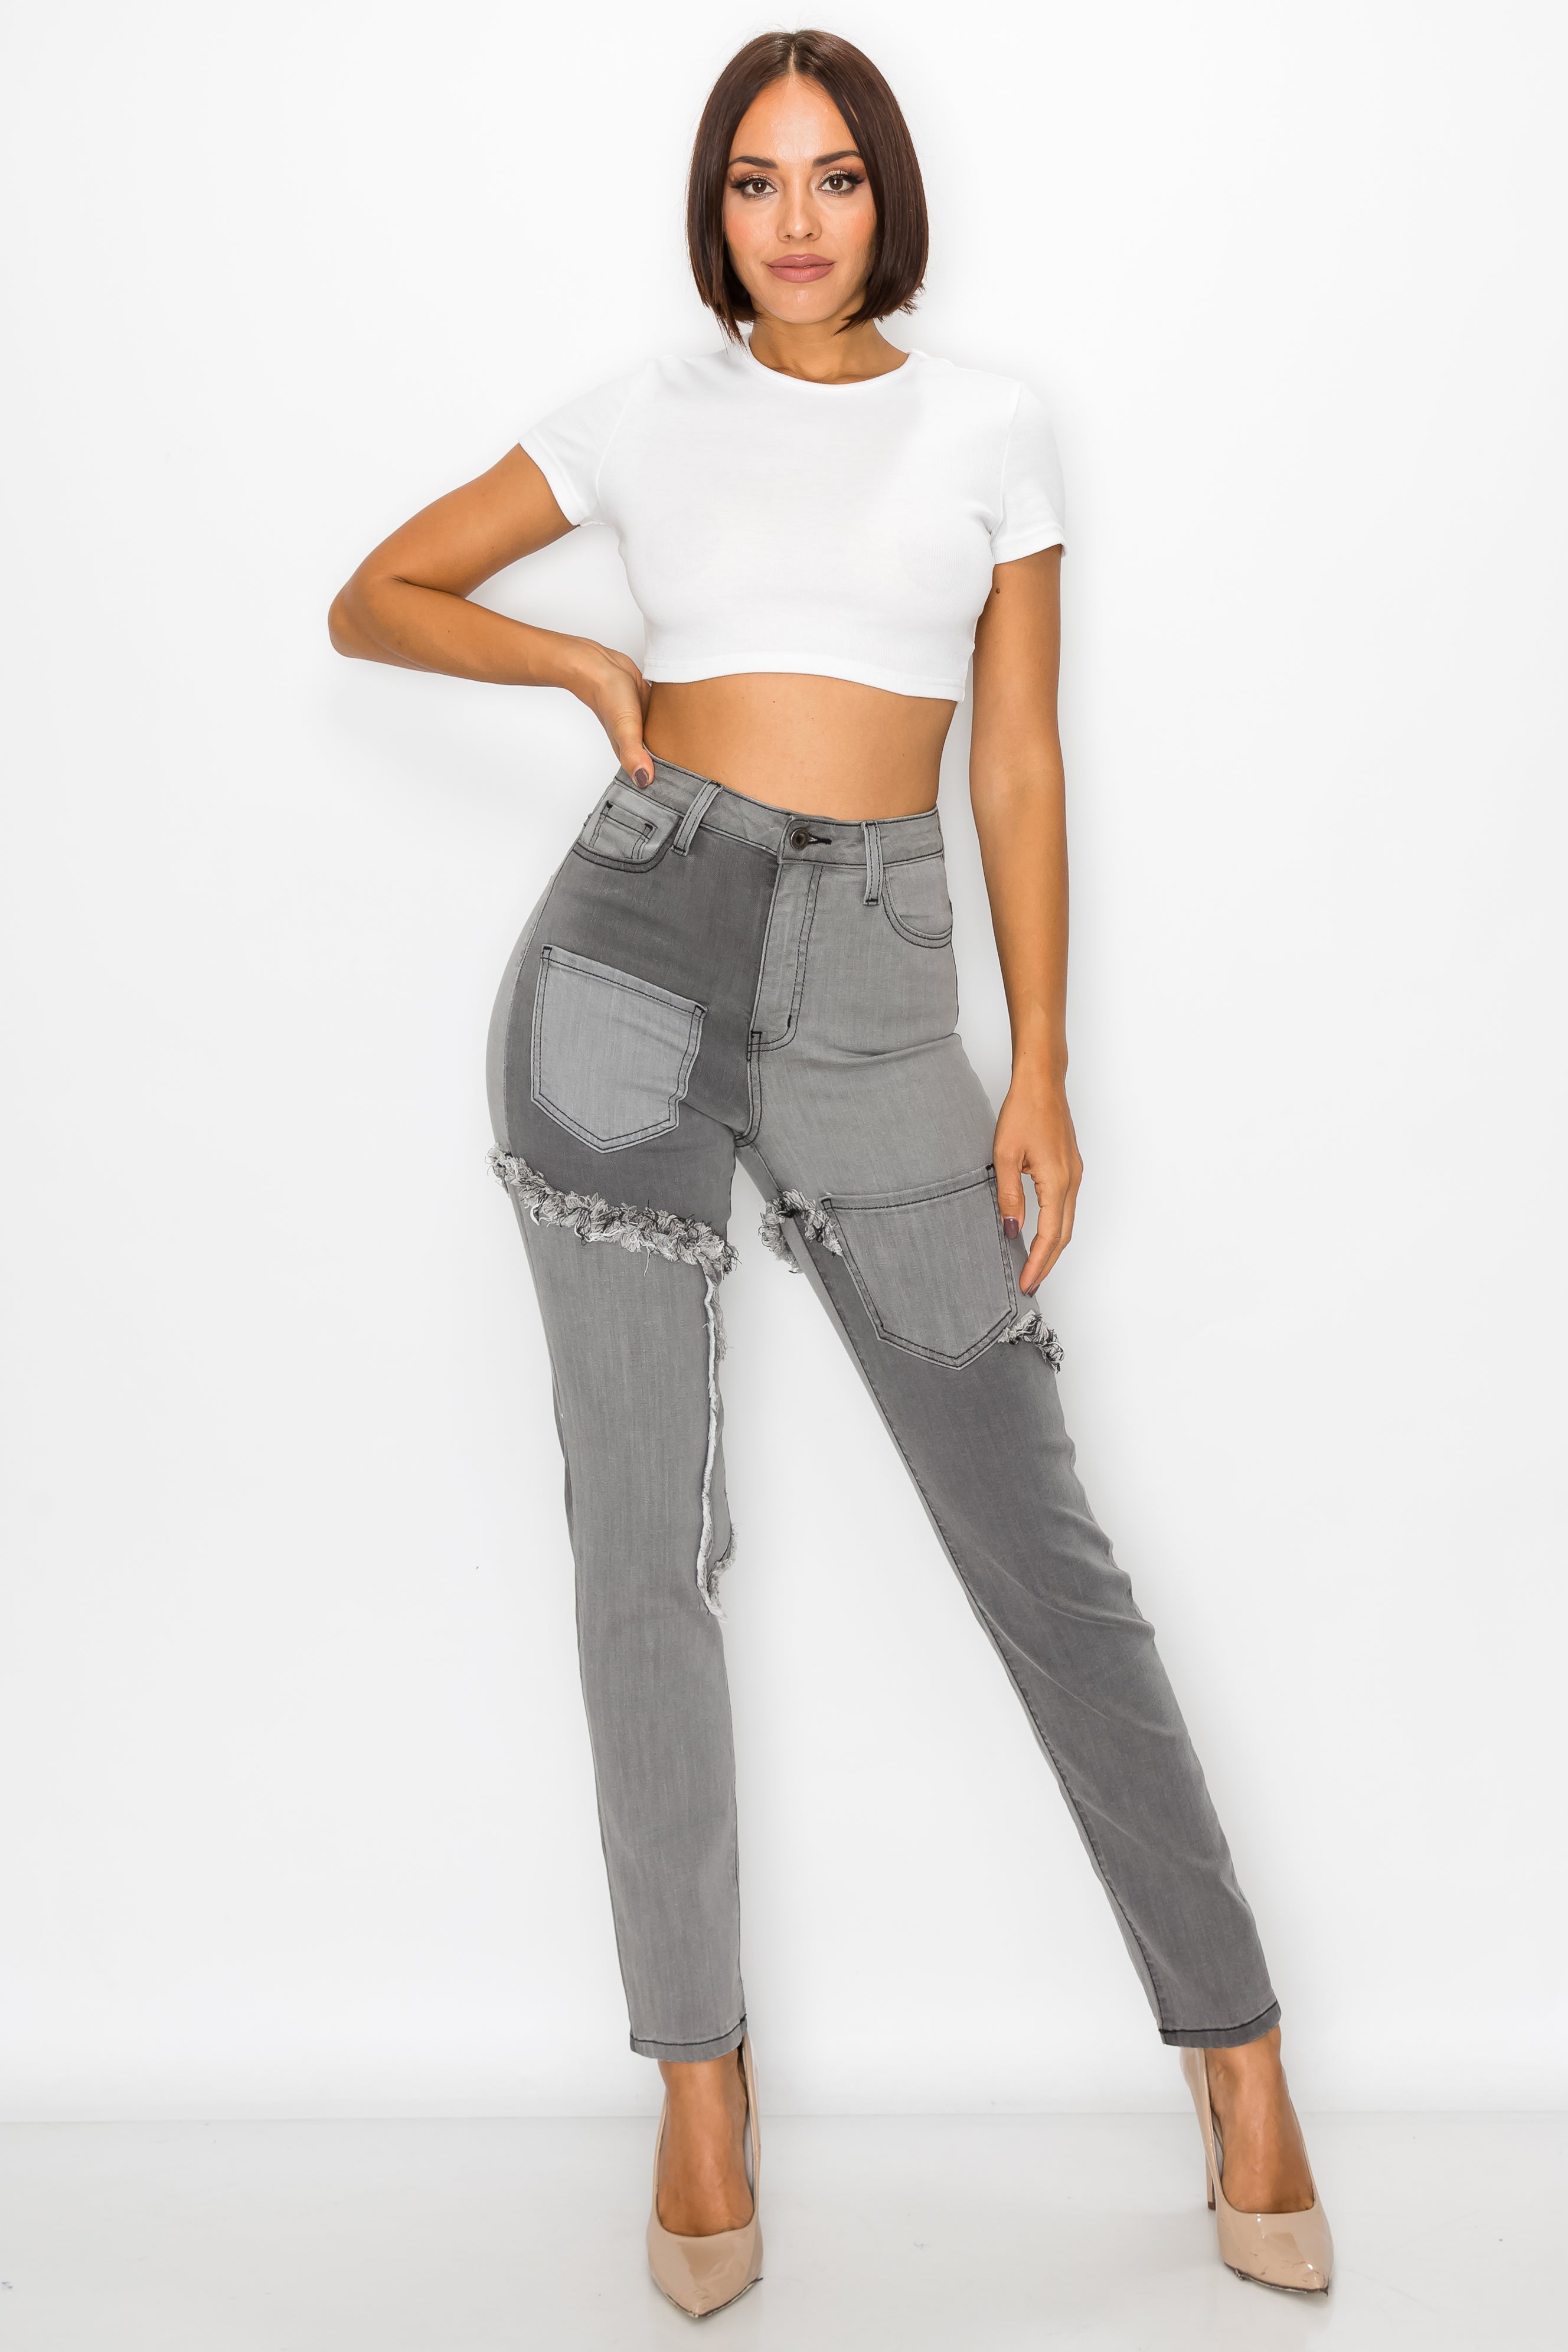 40224 Wome's High Waisted Two Tone Frayed Seam Skinny Jeans